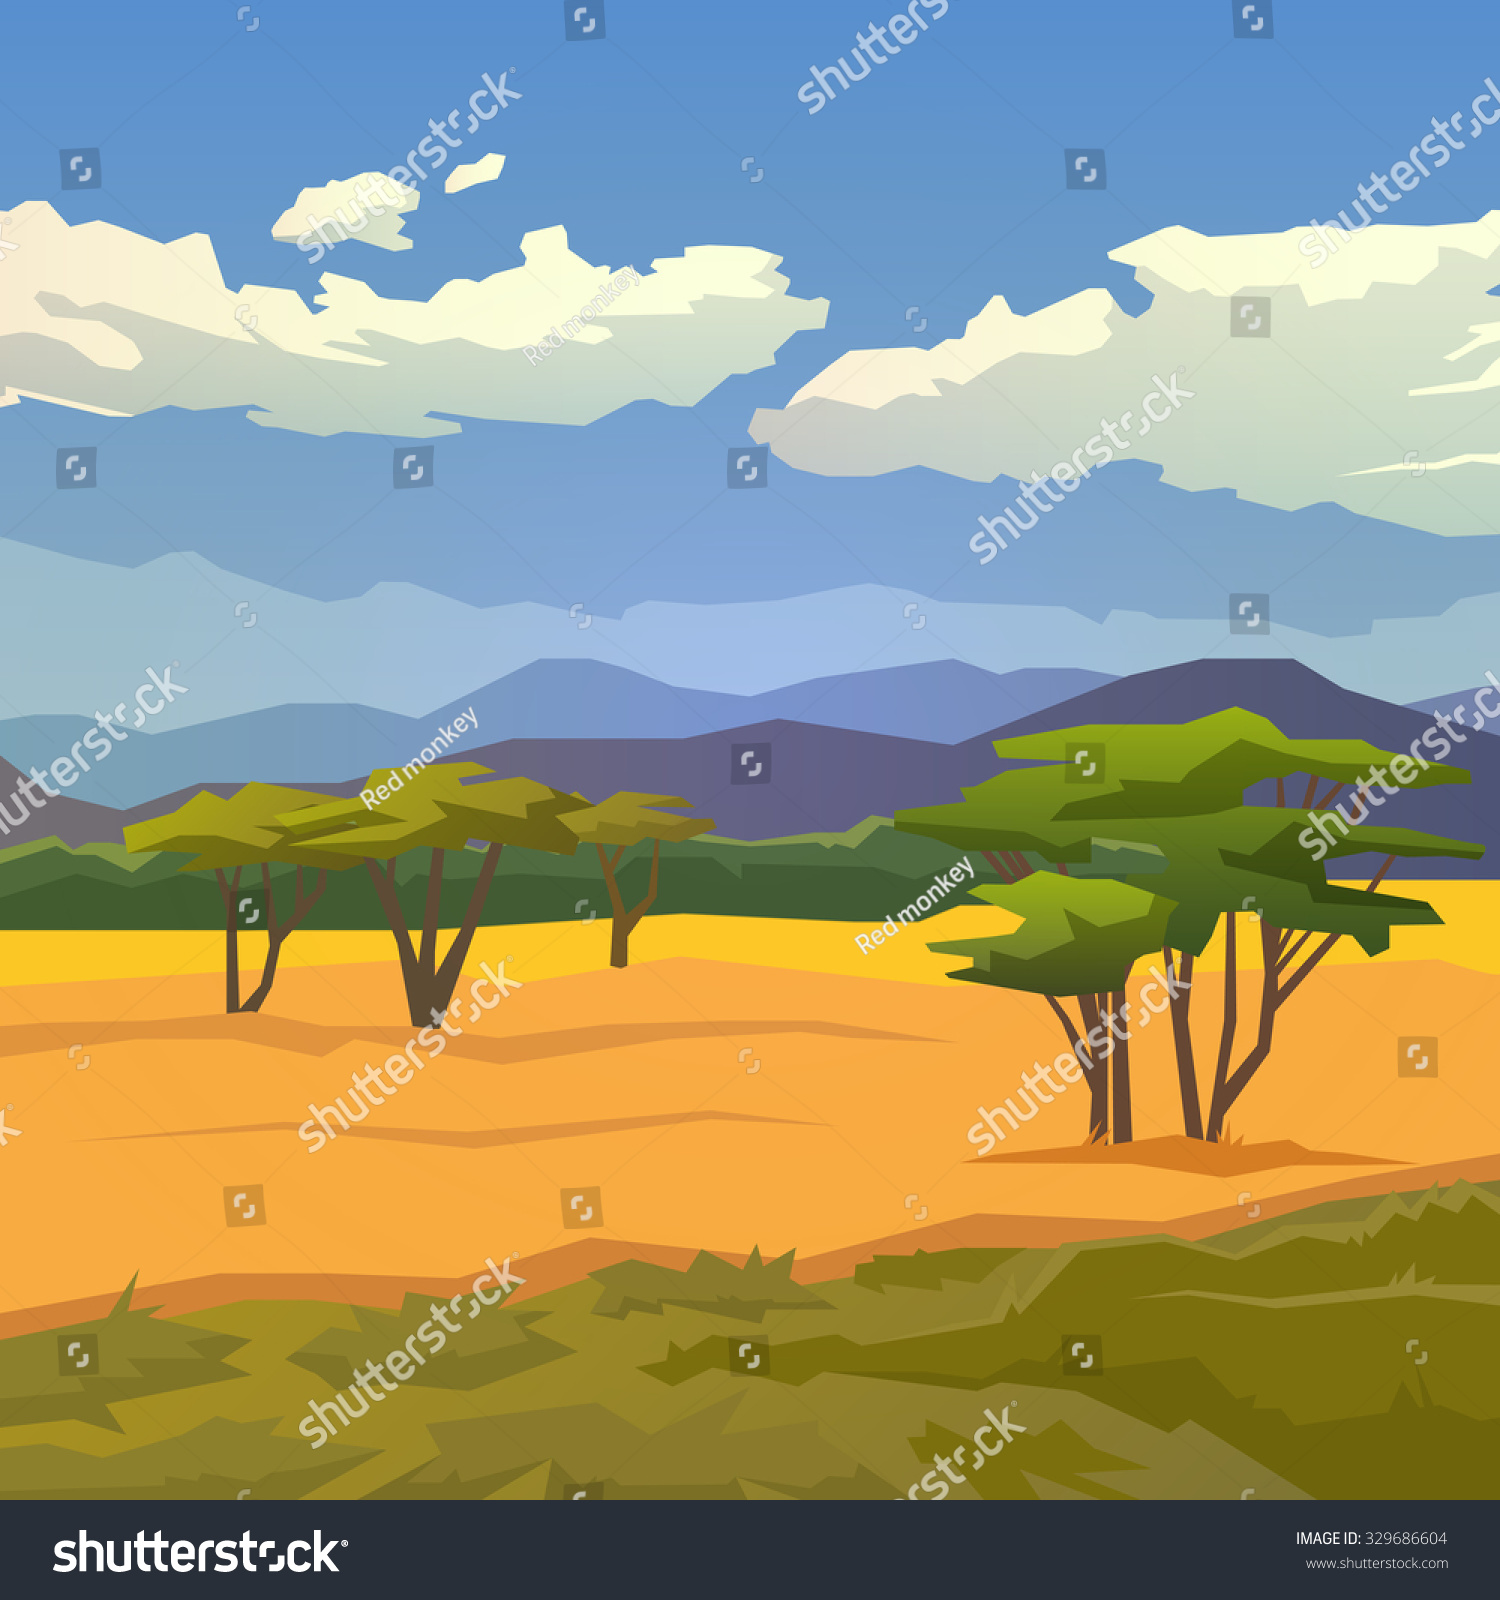 Vector Illustration On Themes Nature Stock Vector (Royalty